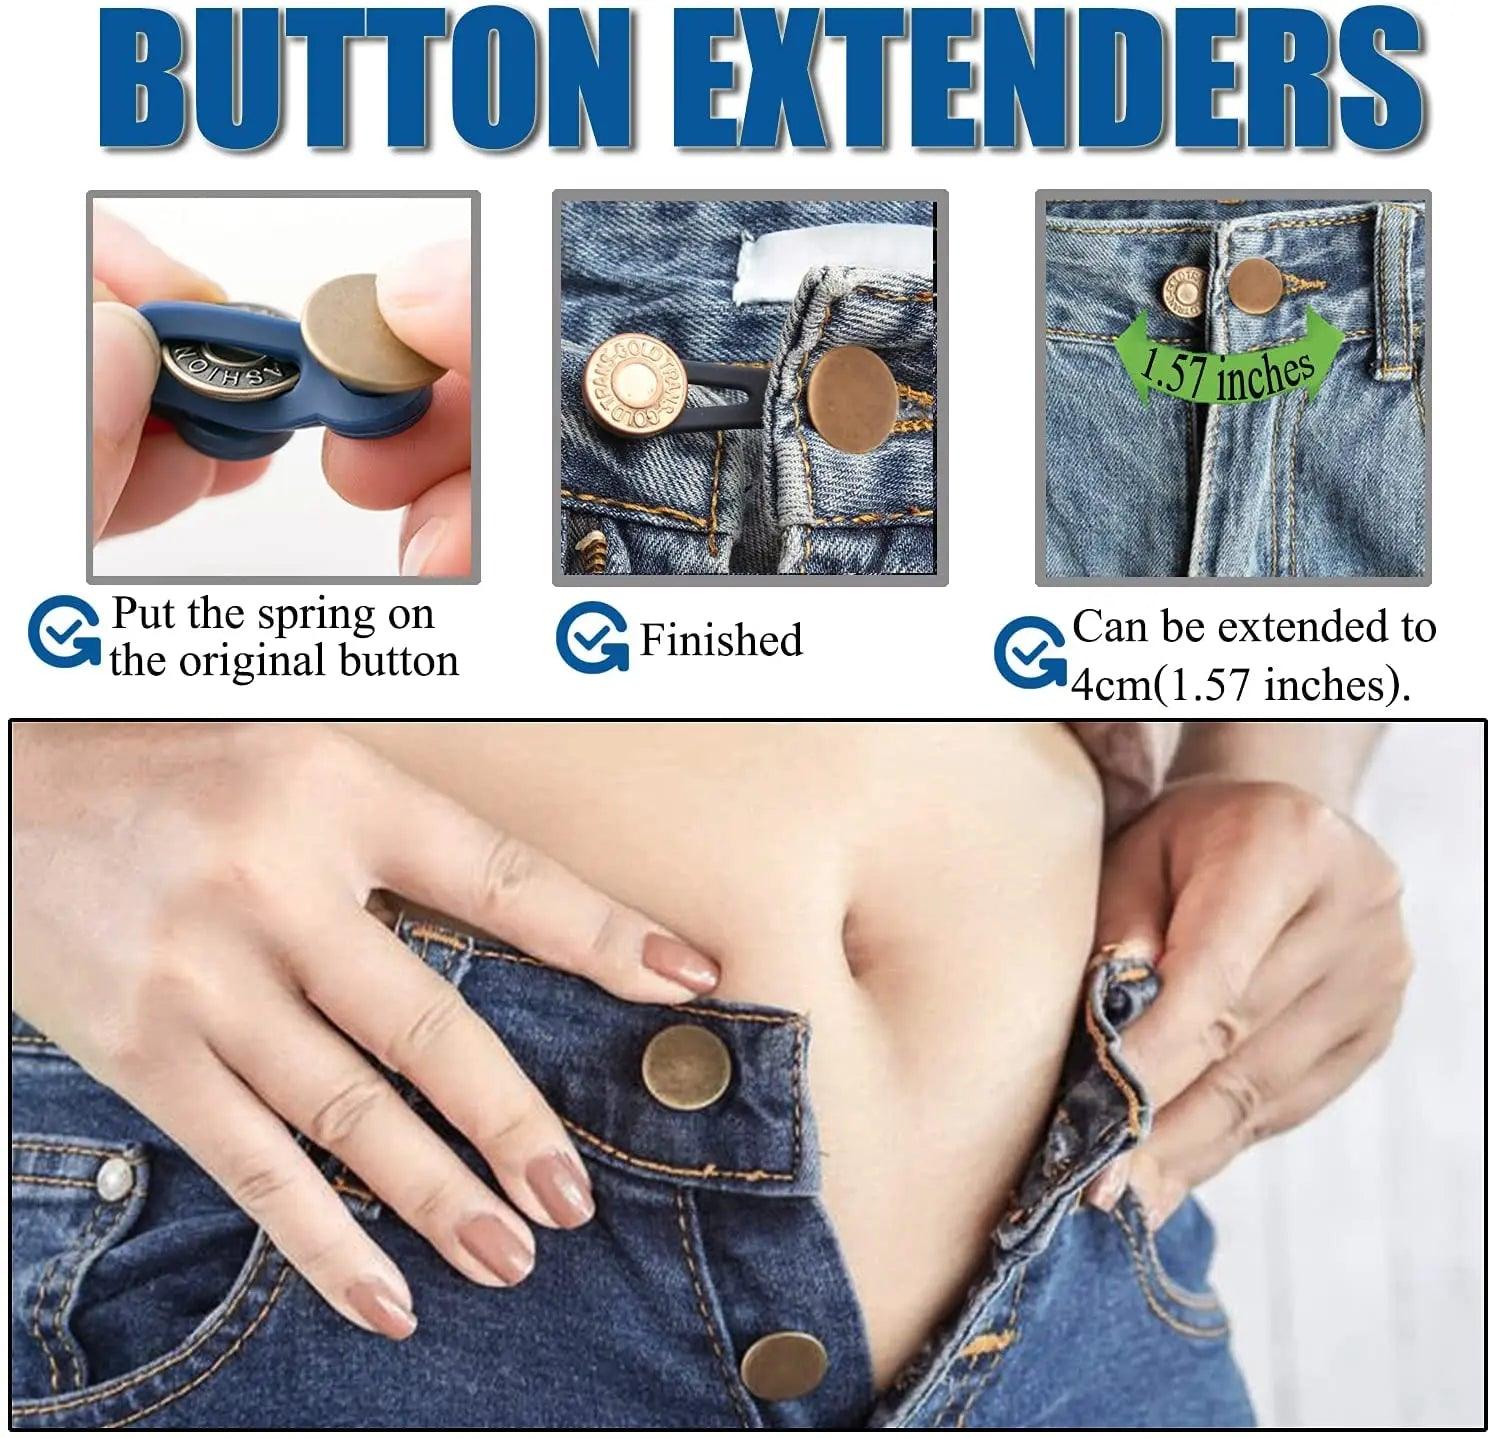 Metal Waistband Extender Set - Adjustable Button Expanders for Pants and Jeans  ourlum.com   